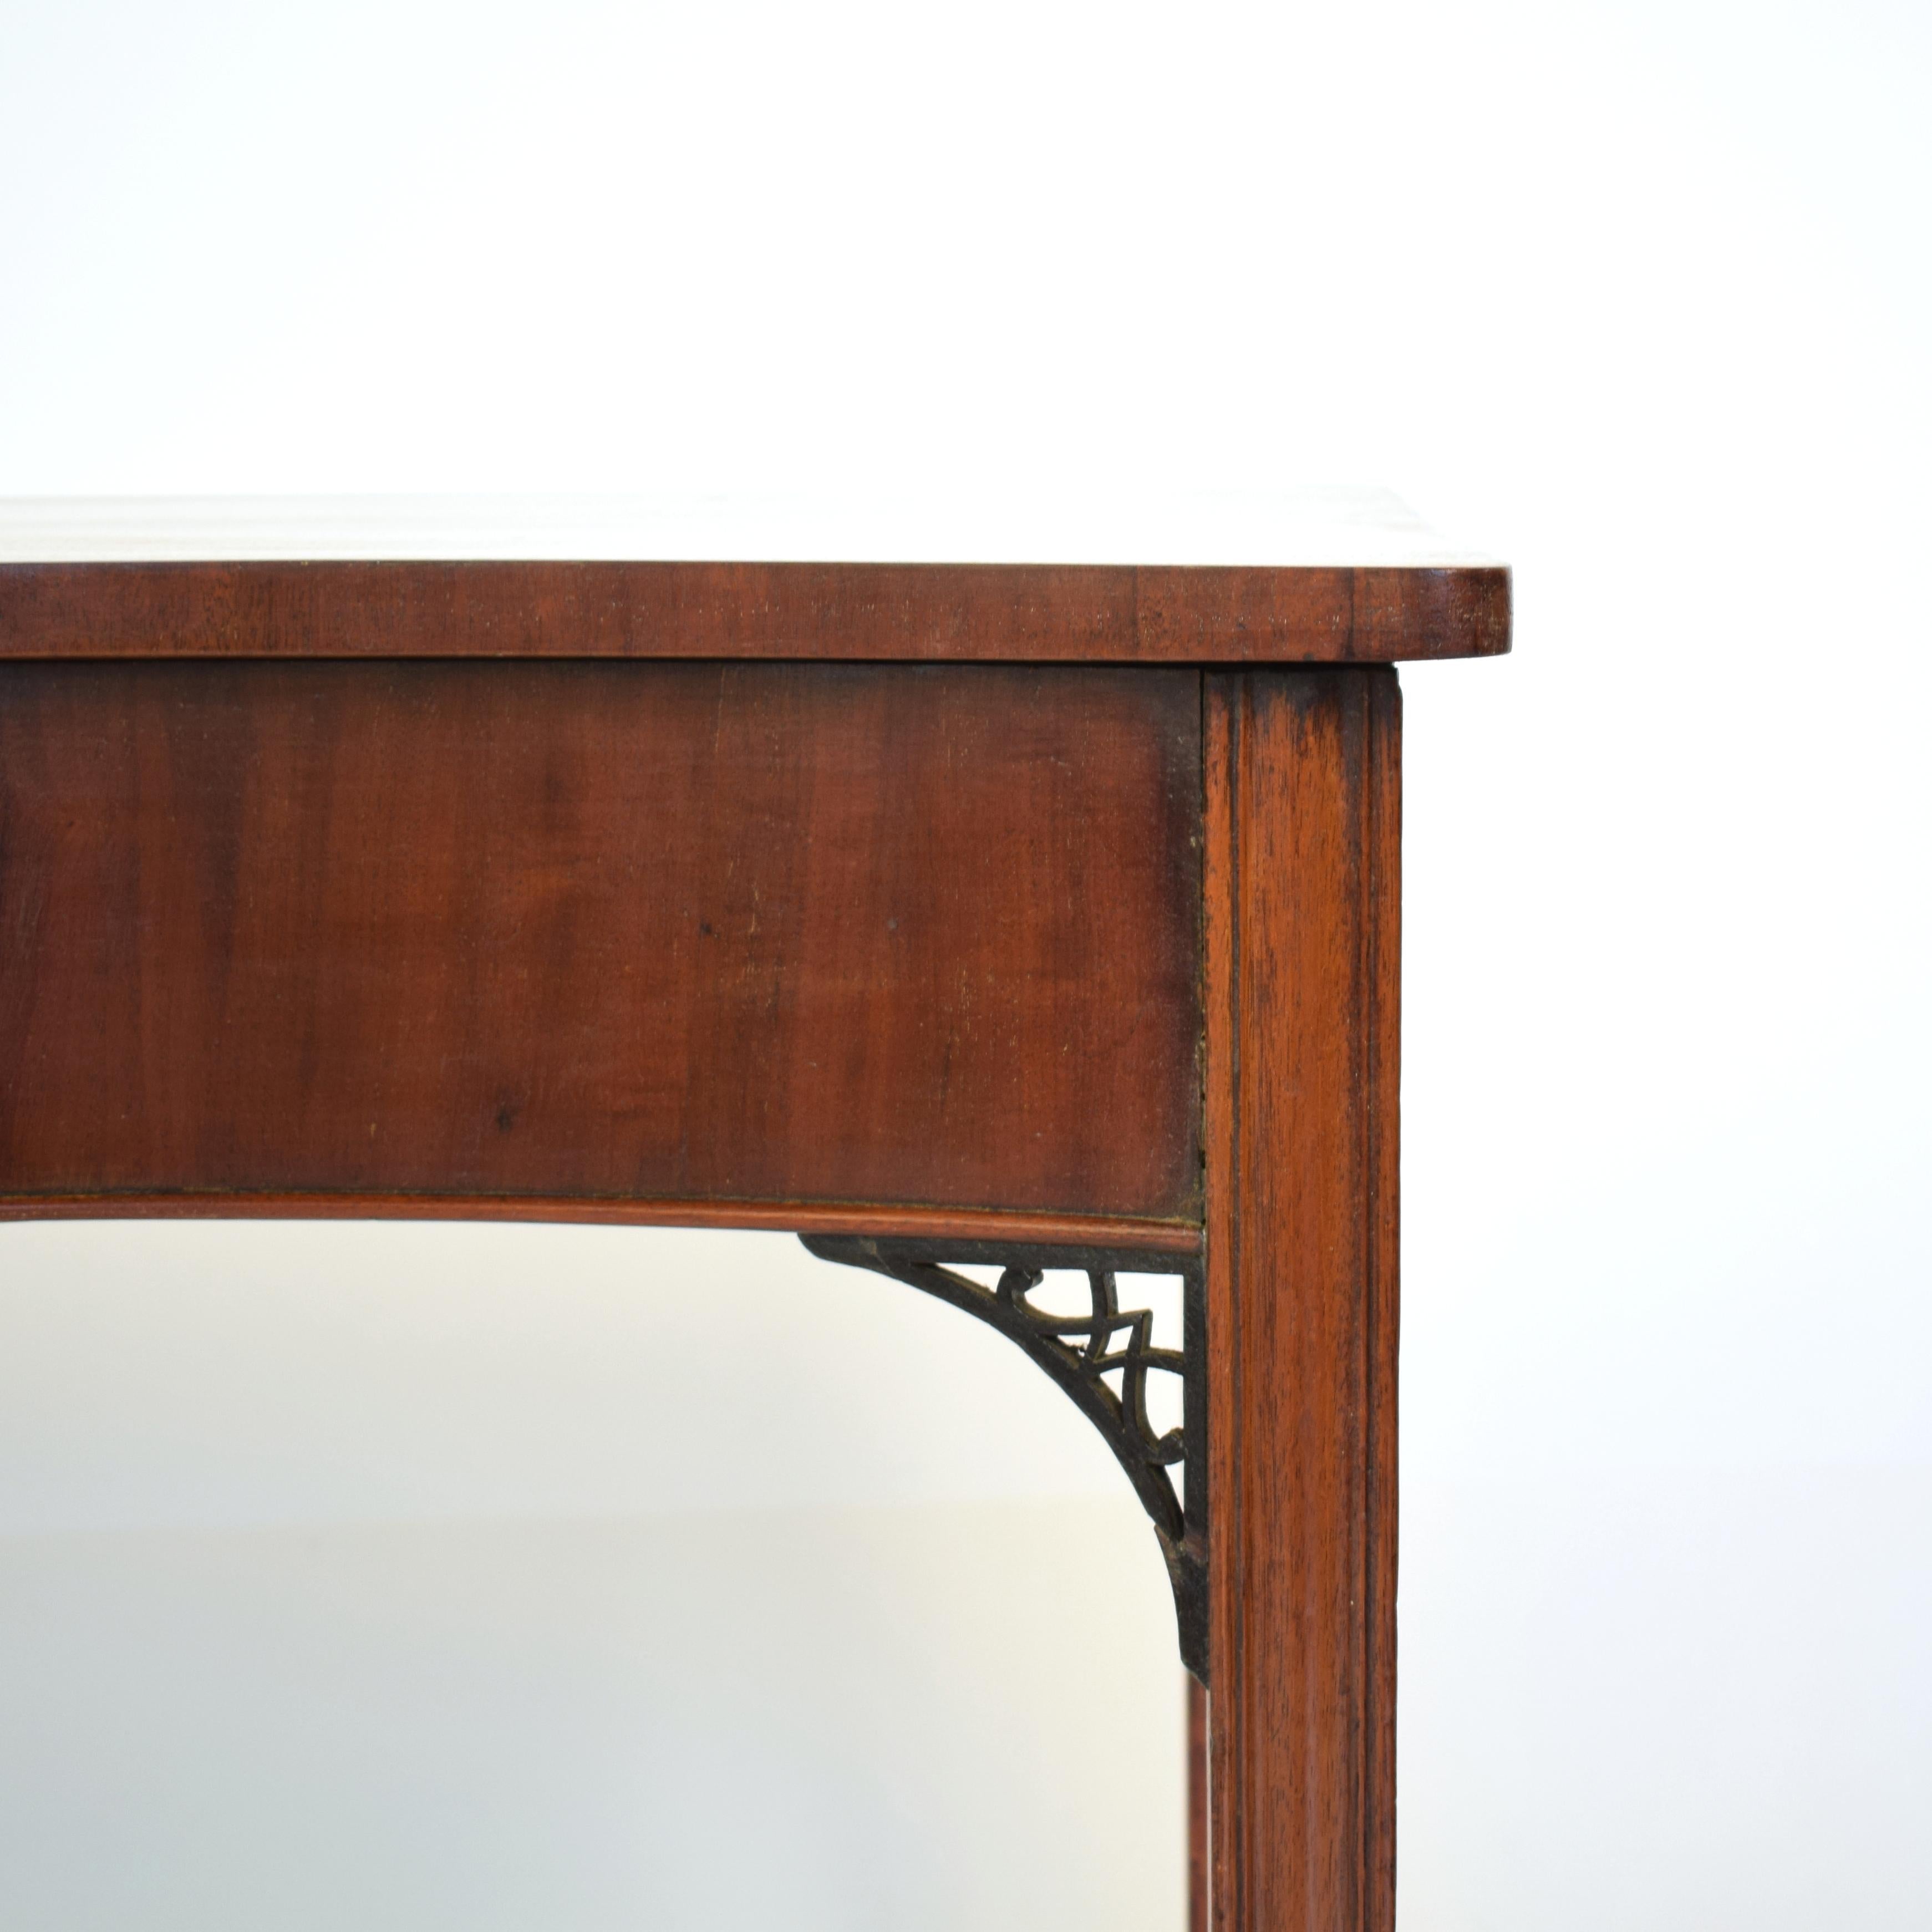 19th Century Mahogany Regency Serpentine Bowed Front Console Serving Table, 1810 im Zustand „Gut“ in Berlin, DE